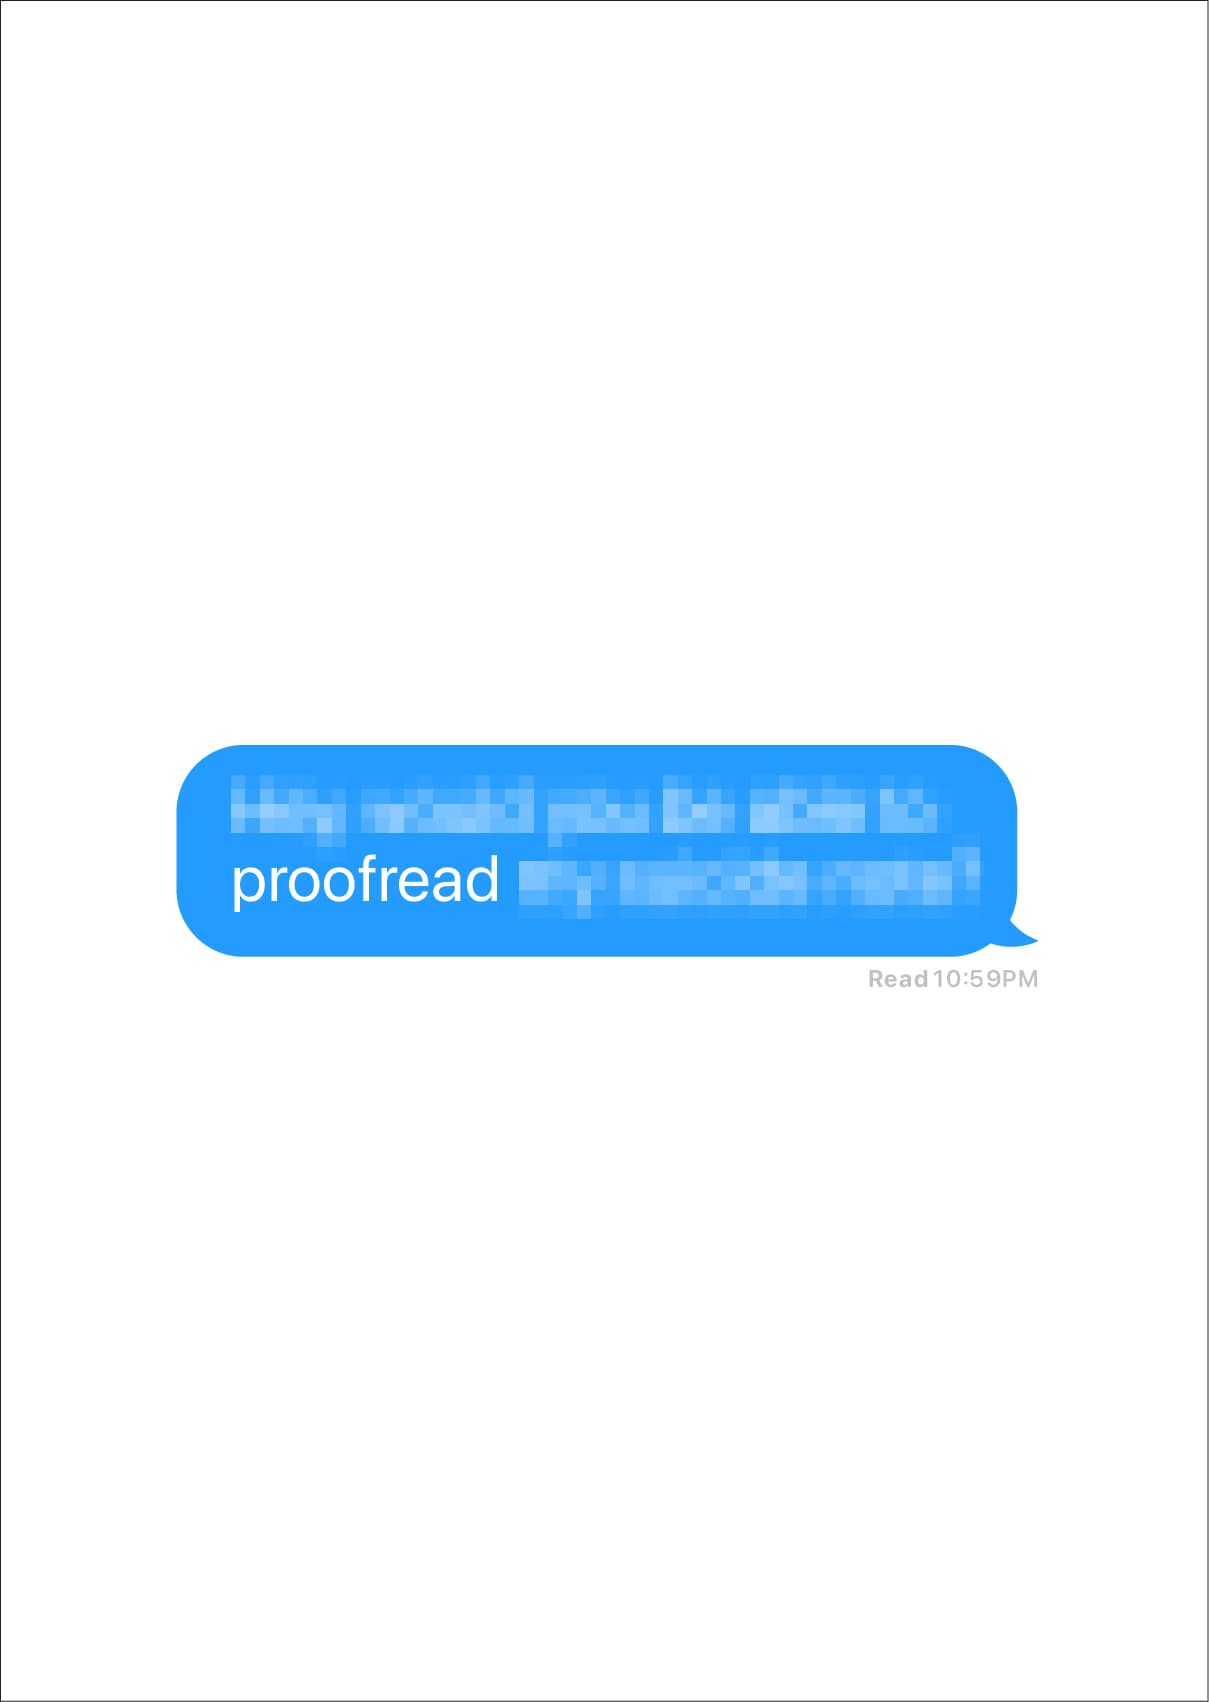 Proofread